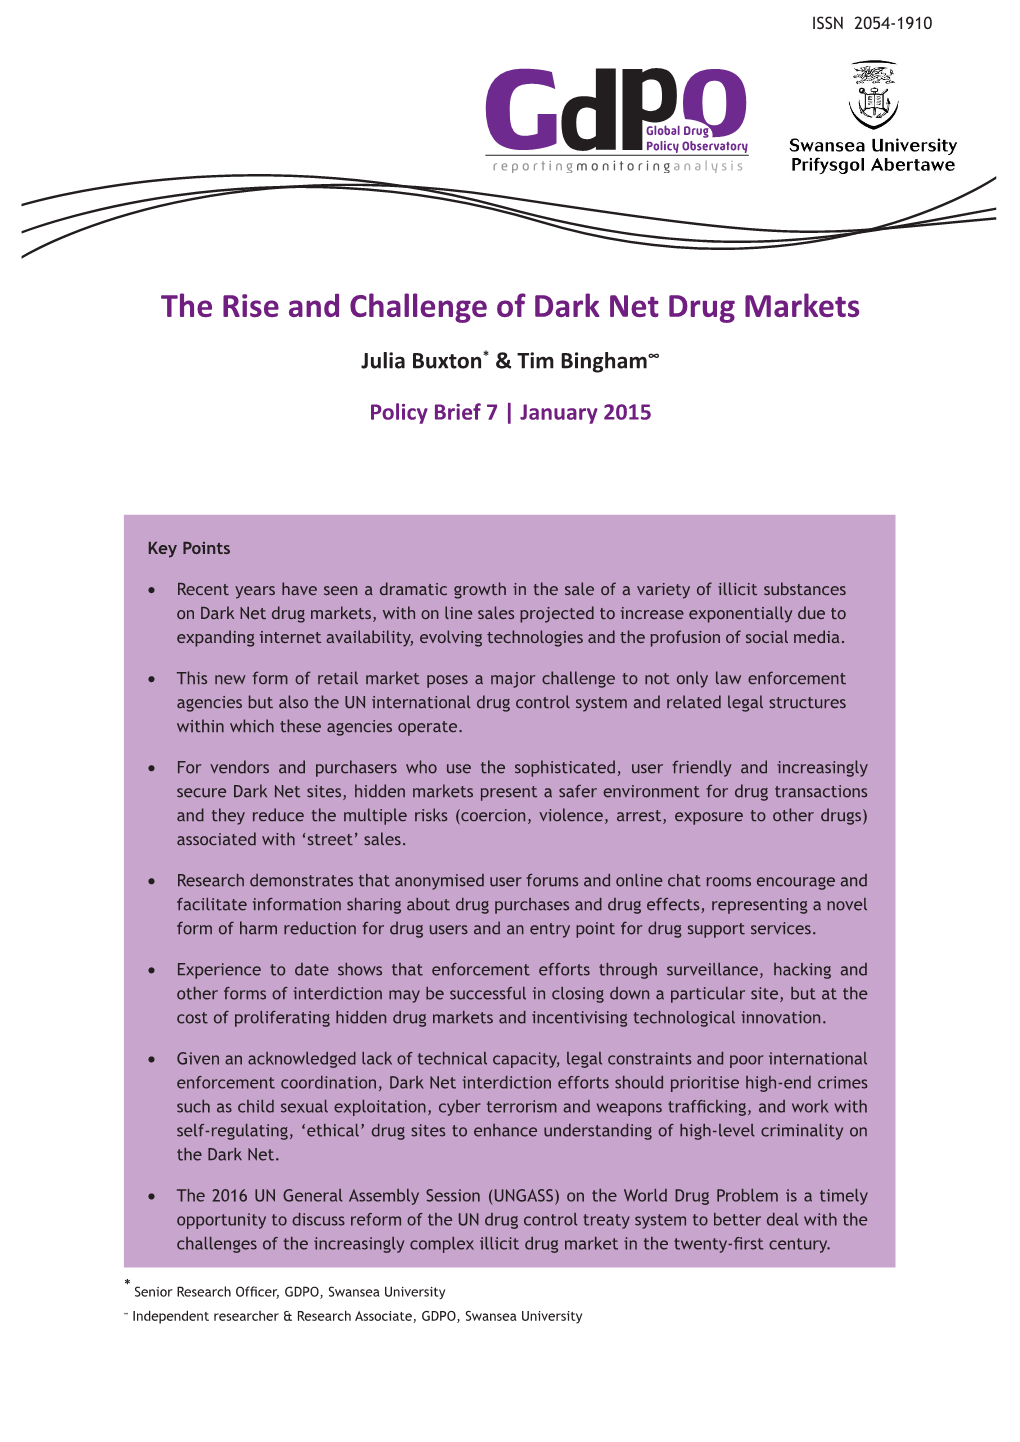 The Rise and Challenge of Dark Net Drug Markets